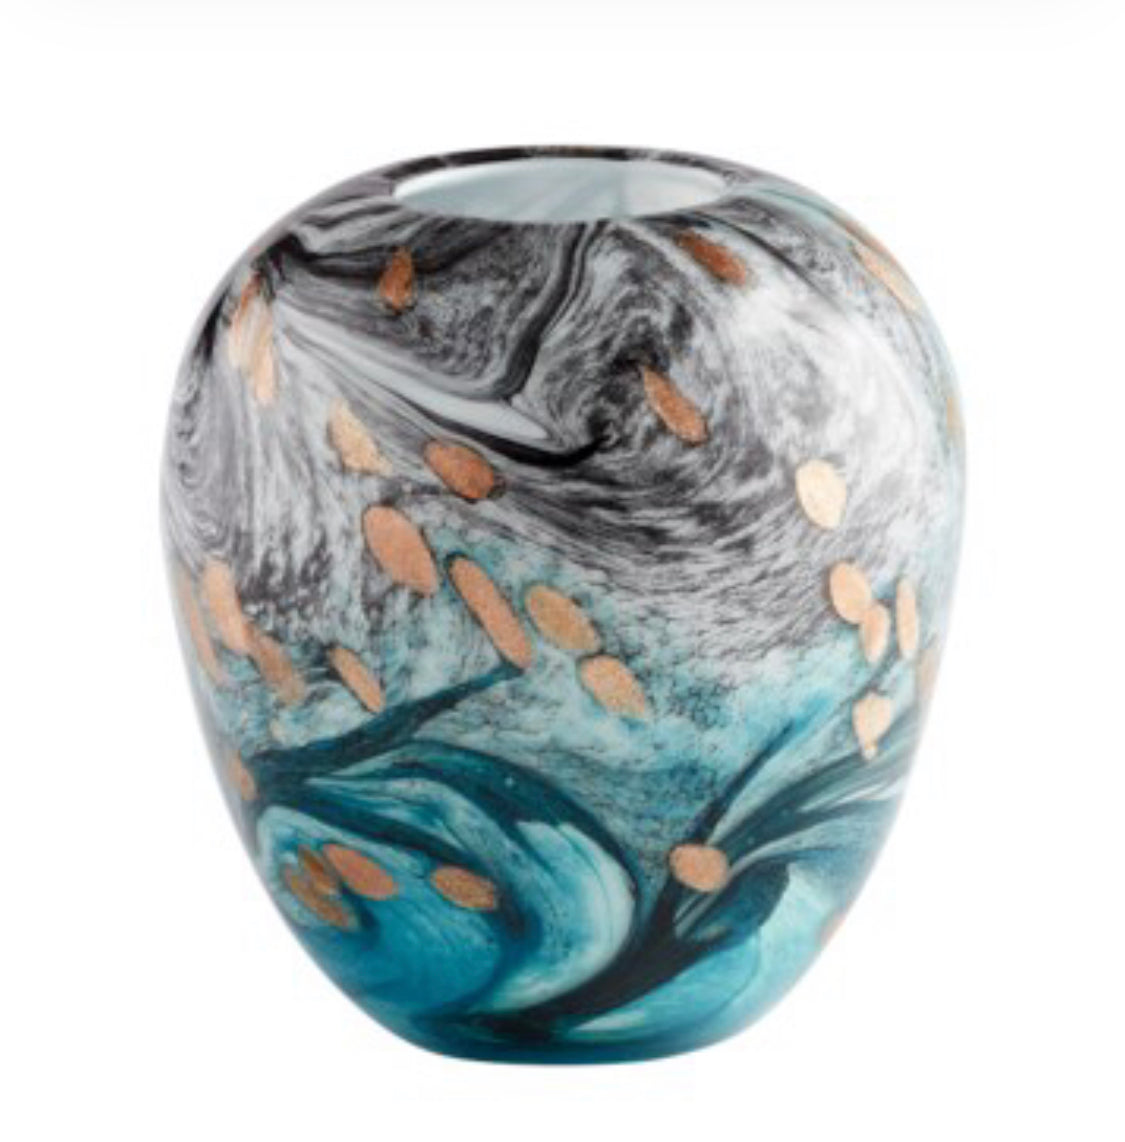 Color can make your space stand out, especially when displayed in unique patterns and formations. For this reason, the Prismatic tabletop vase is sure to add an instant boost to your design plans. Coated in a stunning multicolored gradient finish, this bud-shaped vessel showcases blue, green, grey, and gold splashes. Available in three size options, these rounded vases can create a head-turning display on your dining room table, living room coffee table, or any office bookshelf display  ETA: 5/20/22